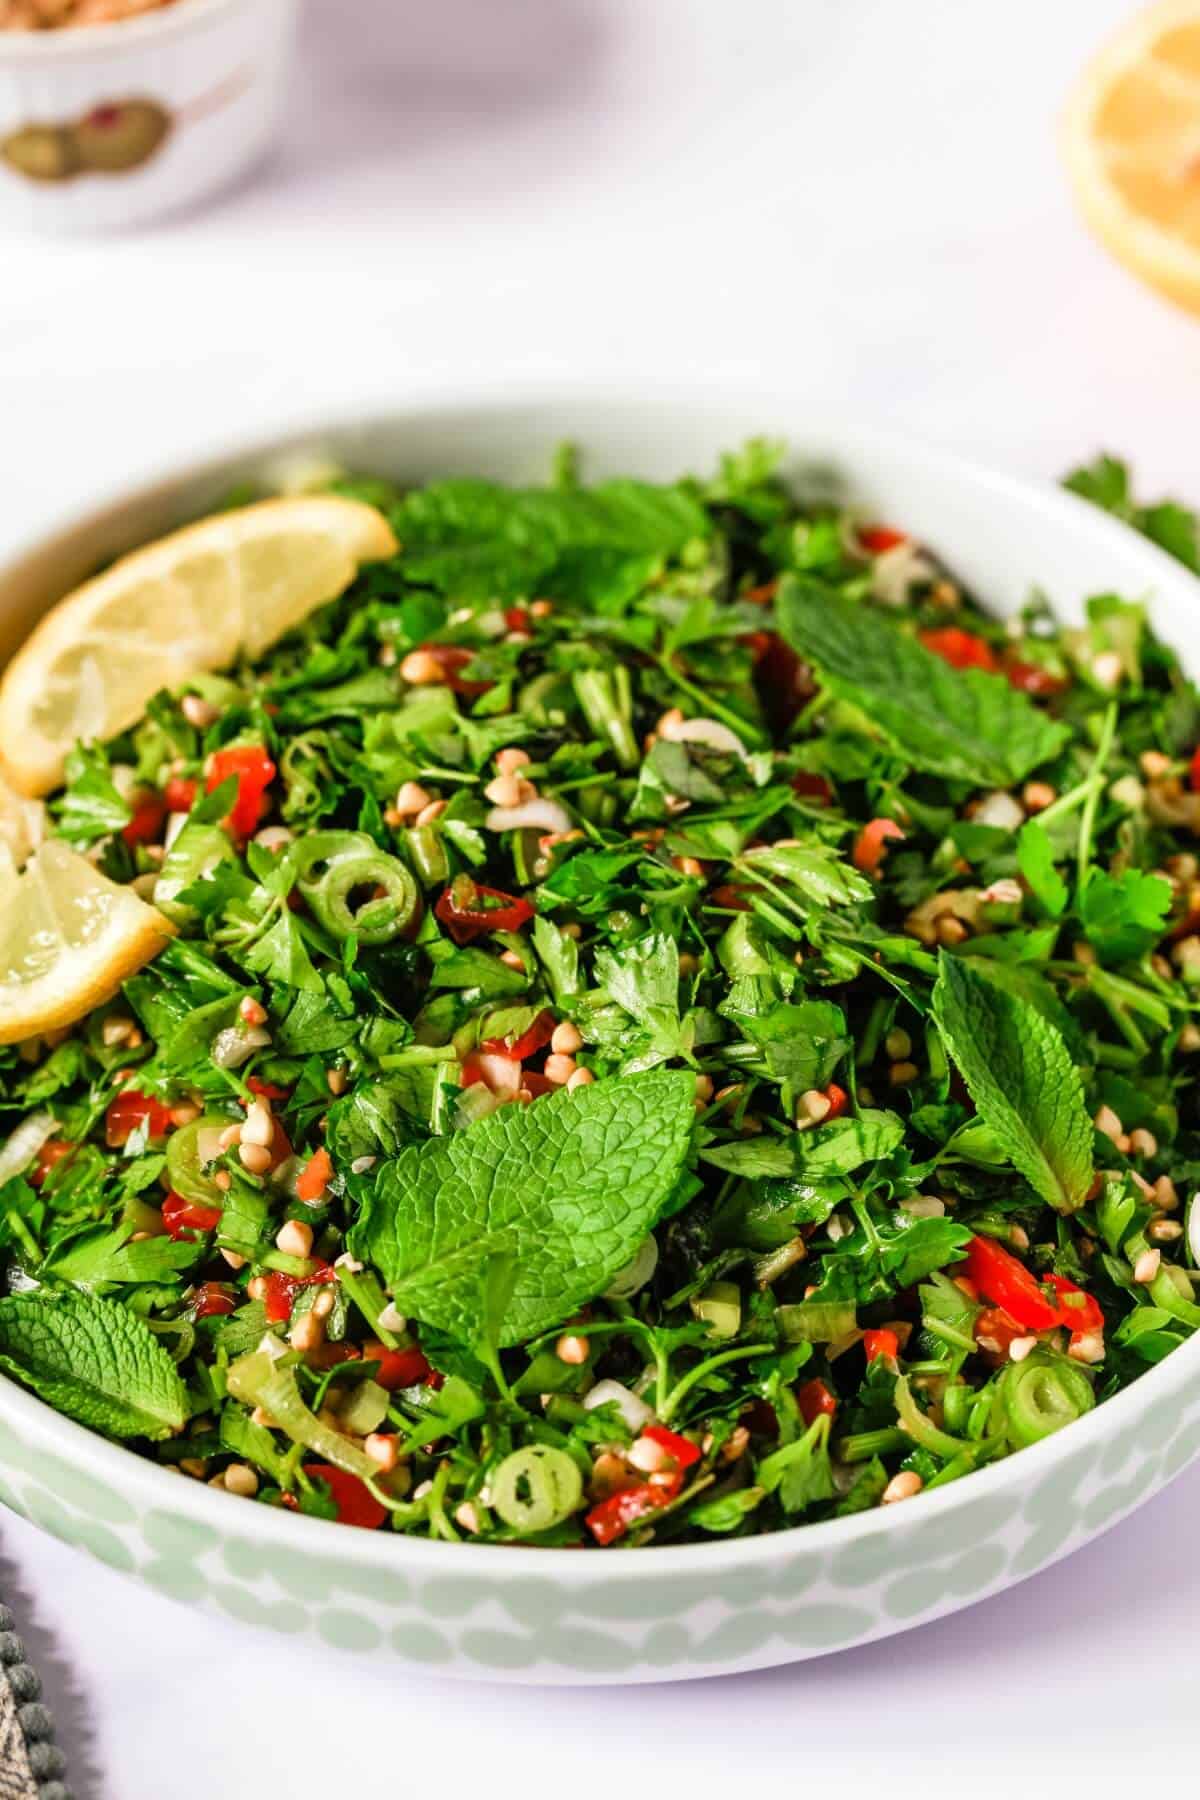 Close up of a bowl filled with finely chopped parsley salad, with buckwheat groats and tomatoes.